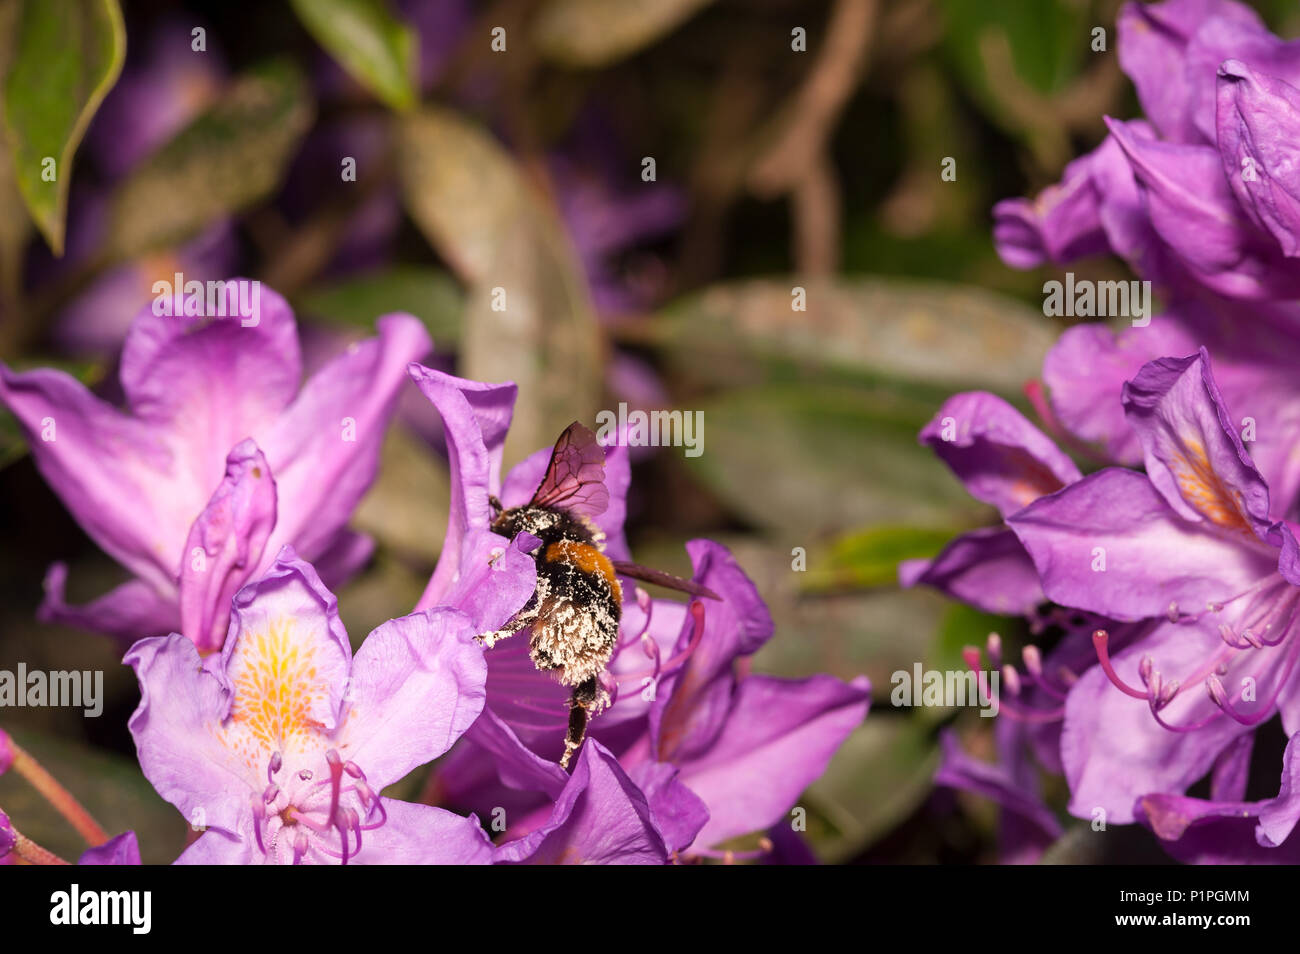 A feeding frenzy feeding on wild Rhododendron flowers has left bumblebees coated in pollen all over adhering to fine hairs on body Bombus hortorum Stock Photo